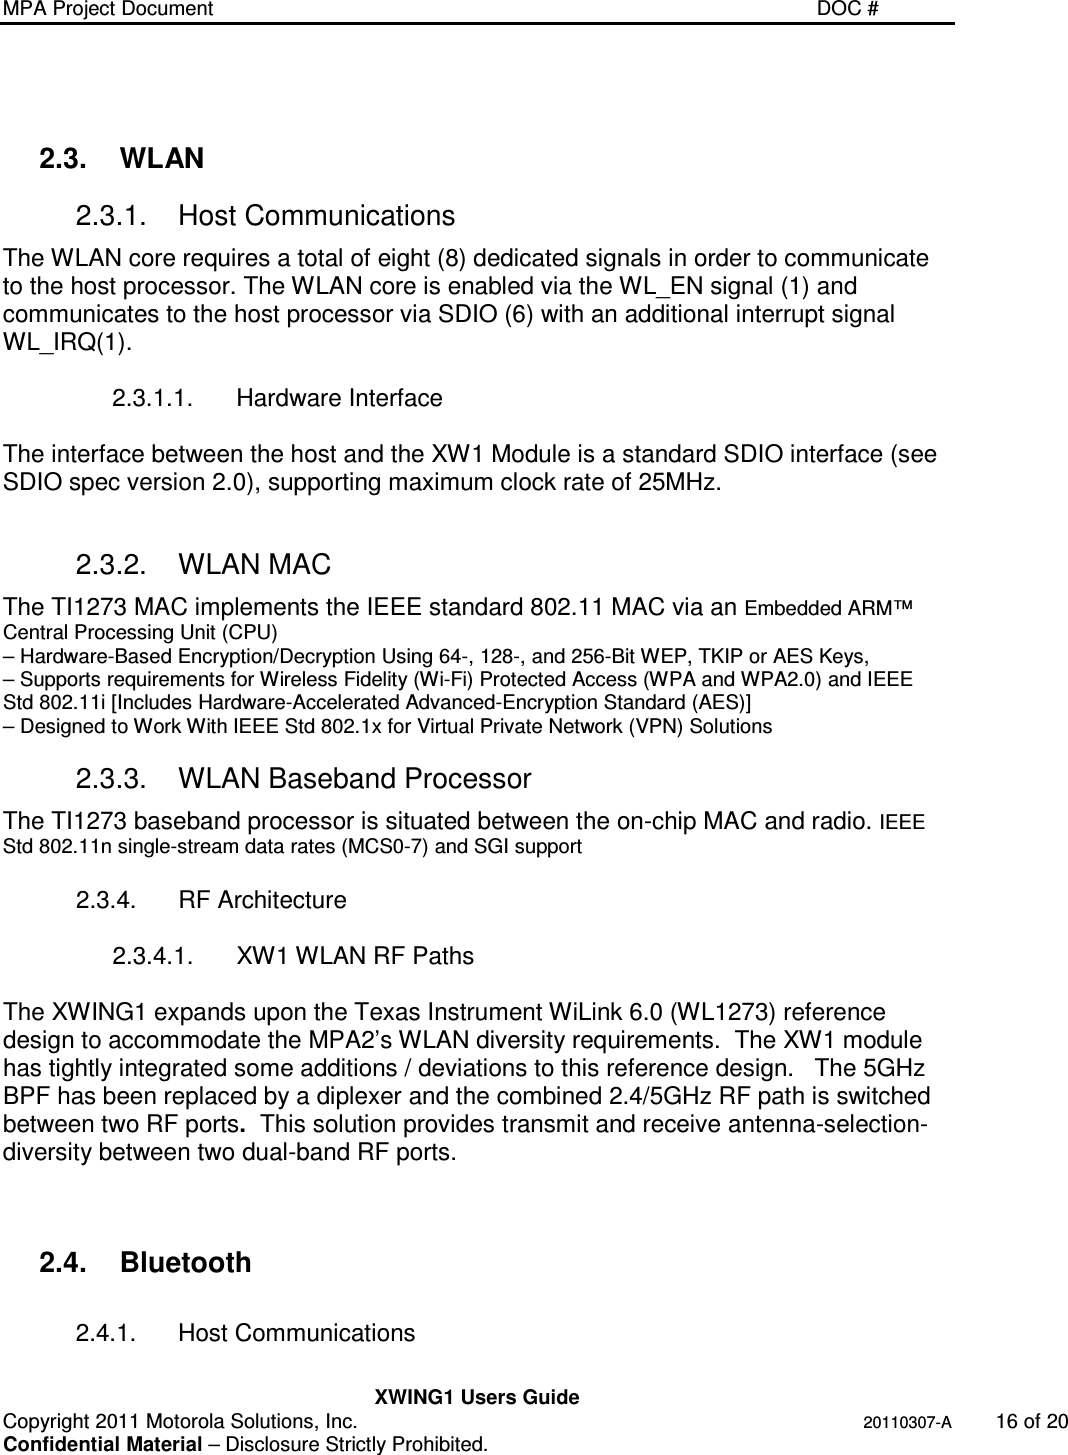 MPA Project Document   DOC #    XWING1 Users Guide Copyright 2011 Motorola Solutions, Inc.   20110307-A  16 of 20 Confidential Material – Disclosure Strictly Prohibited.  2.3.  WLAN 2.3.1.  Host Communications The WLAN core requires a total of eight (8) dedicated signals in order to communicate to the host processor. The WLAN core is enabled via the WL_EN signal (1) and communicates to the host processor via SDIO (6) with an additional interrupt signal WL_IRQ(1).  2.3.1.1.  Hardware Interface  The interface between the host and the XW1 Module is a standard SDIO interface (see SDIO spec version 2.0), supporting maximum clock rate of 25MHz.  2.3.2.  WLAN MAC The TI1273 MAC implements the IEEE standard 802.11 MAC via an Embedded ARM™ Central Processing Unit (CPU) – Hardware-Based Encryption/Decryption Using 64-, 128-, and 256-Bit WEP, TKIP or AES Keys, – Supports requirements for Wireless Fidelity (Wi-Fi) Protected Access (WPA and WPA2.0) and IEEE Std 802.11i [Includes Hardware-Accelerated Advanced-Encryption Standard (AES)] – Designed to Work With IEEE Std 802.1x for Virtual Private Network (VPN) Solutions 2.3.3.  WLAN Baseband Processor The TI1273 baseband processor is situated between the on-chip MAC and radio. IEEE Std 802.11n single-stream data rates (MCS0-7) and SGI support  2.3.4.  RF Architecture  2.3.4.1.  XW1 WLAN RF Paths  The XWING1 expands upon the Texas Instrument WiLink 6.0 (WL1273) reference design to accommodate the MPA2’s WLAN diversity requirements.  The XW1 module has tightly integrated some additions / deviations to this reference design.   The 5GHz BPF has been replaced by a diplexer and the combined 2.4/5GHz RF path is switched between two RF ports.  This solution provides transmit and receive antenna-selection-diversity between two dual-band RF ports.    2.4.  Bluetooth  2.4.1.  Host Communications  